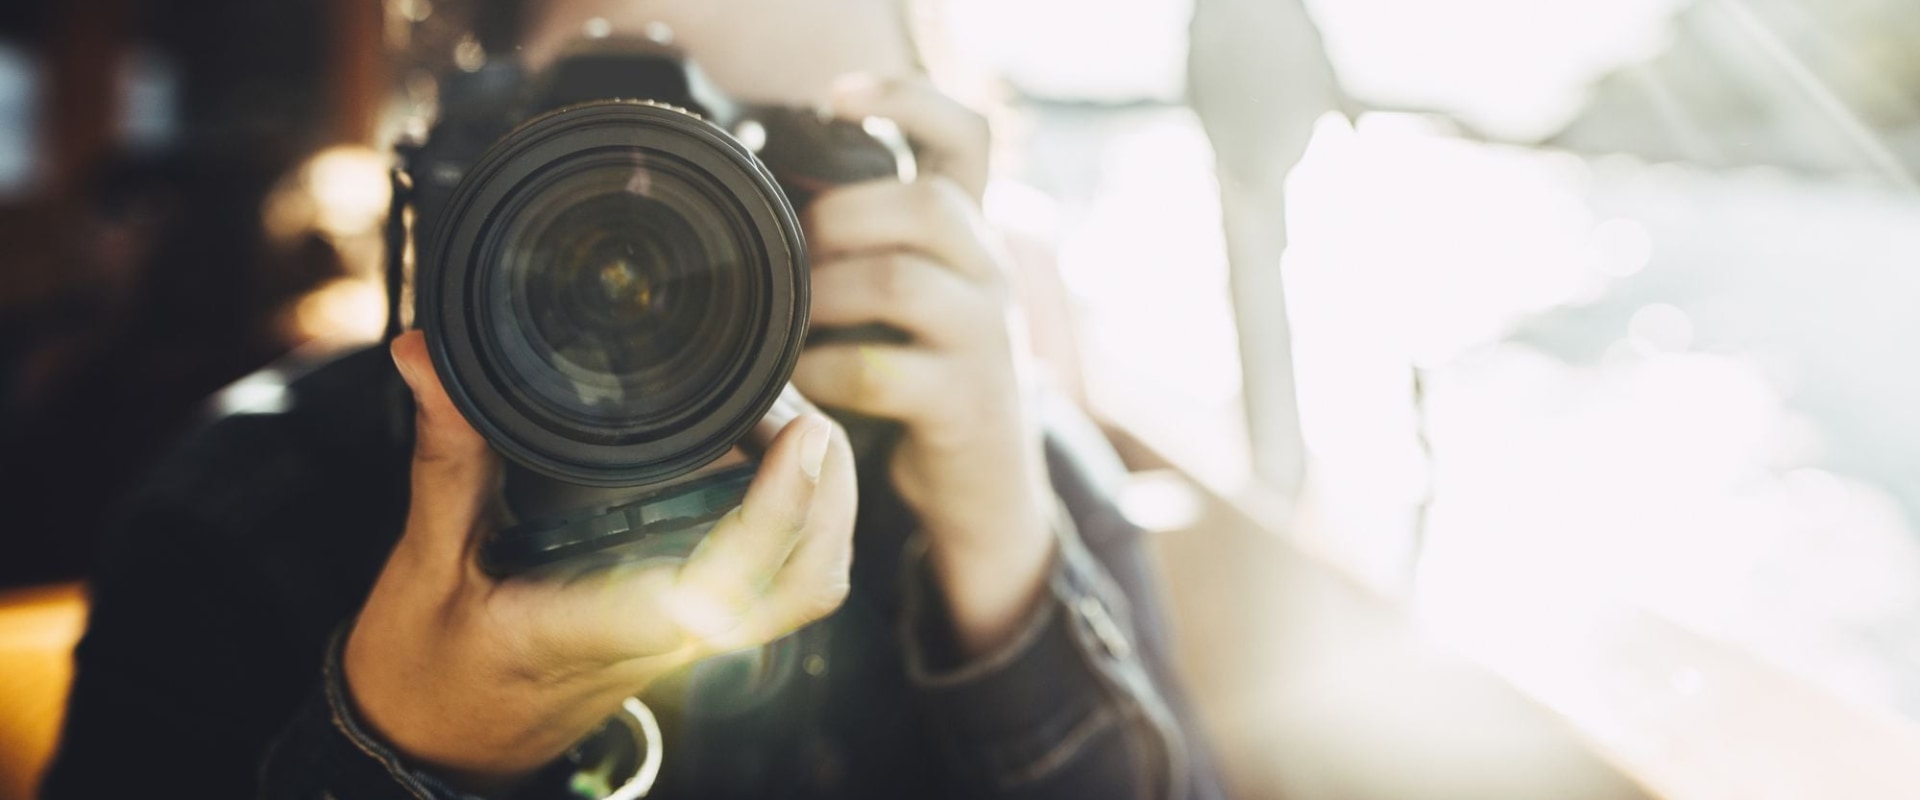 Finding Your Niche as a Photographer: How to Develop the Skills You Need